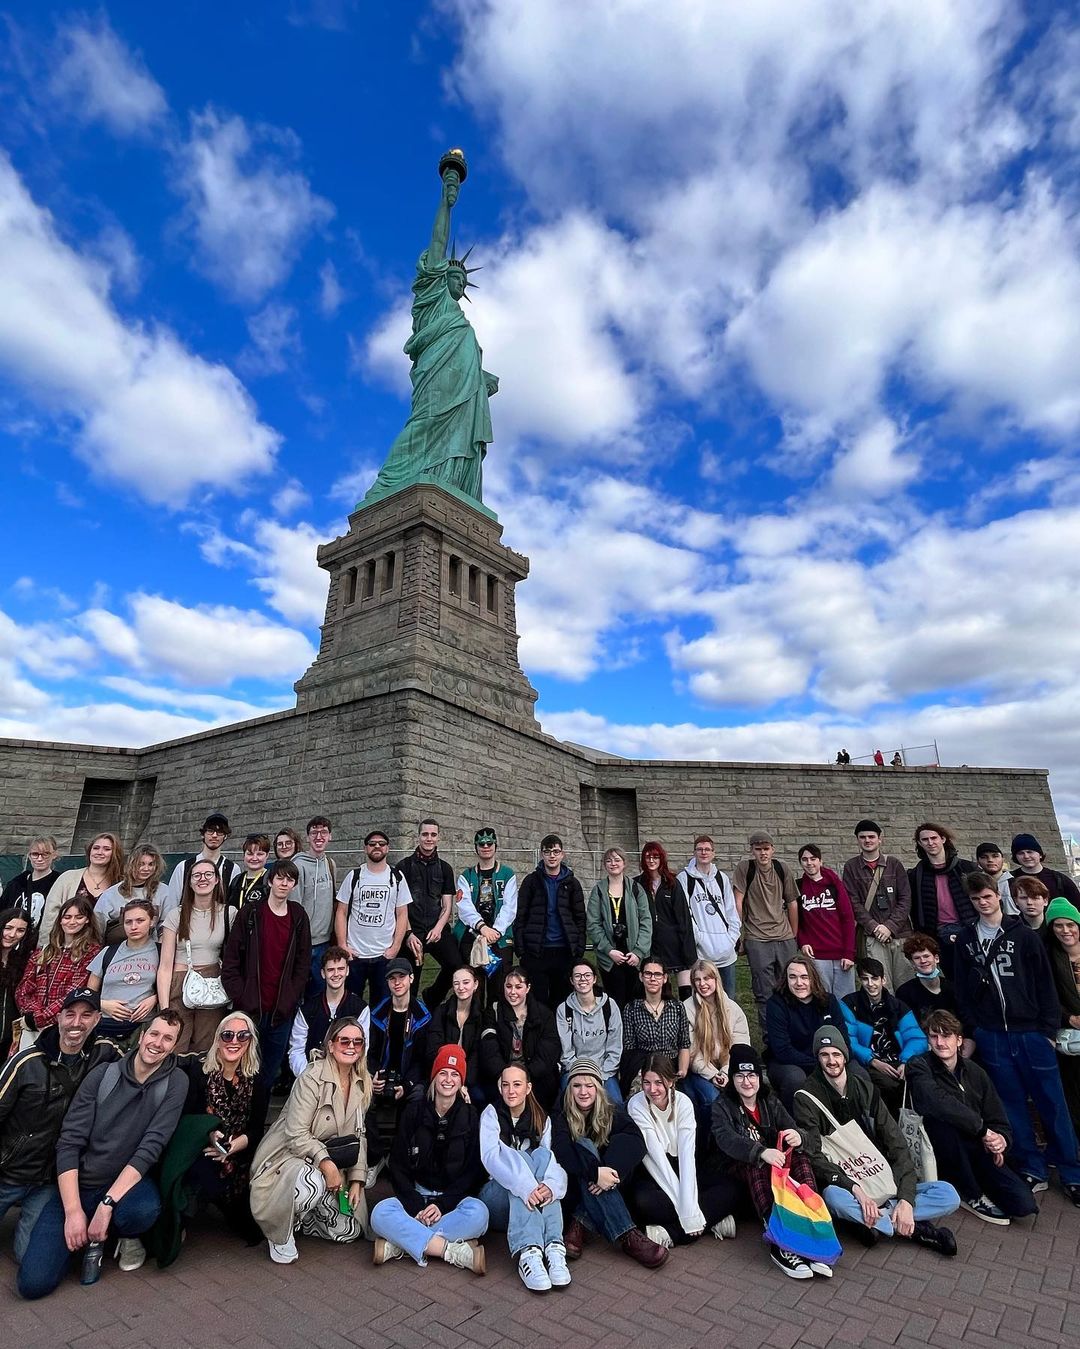 Students experience ‘once in a lifetime’ American study trip thanks to link up with Turing Scheme